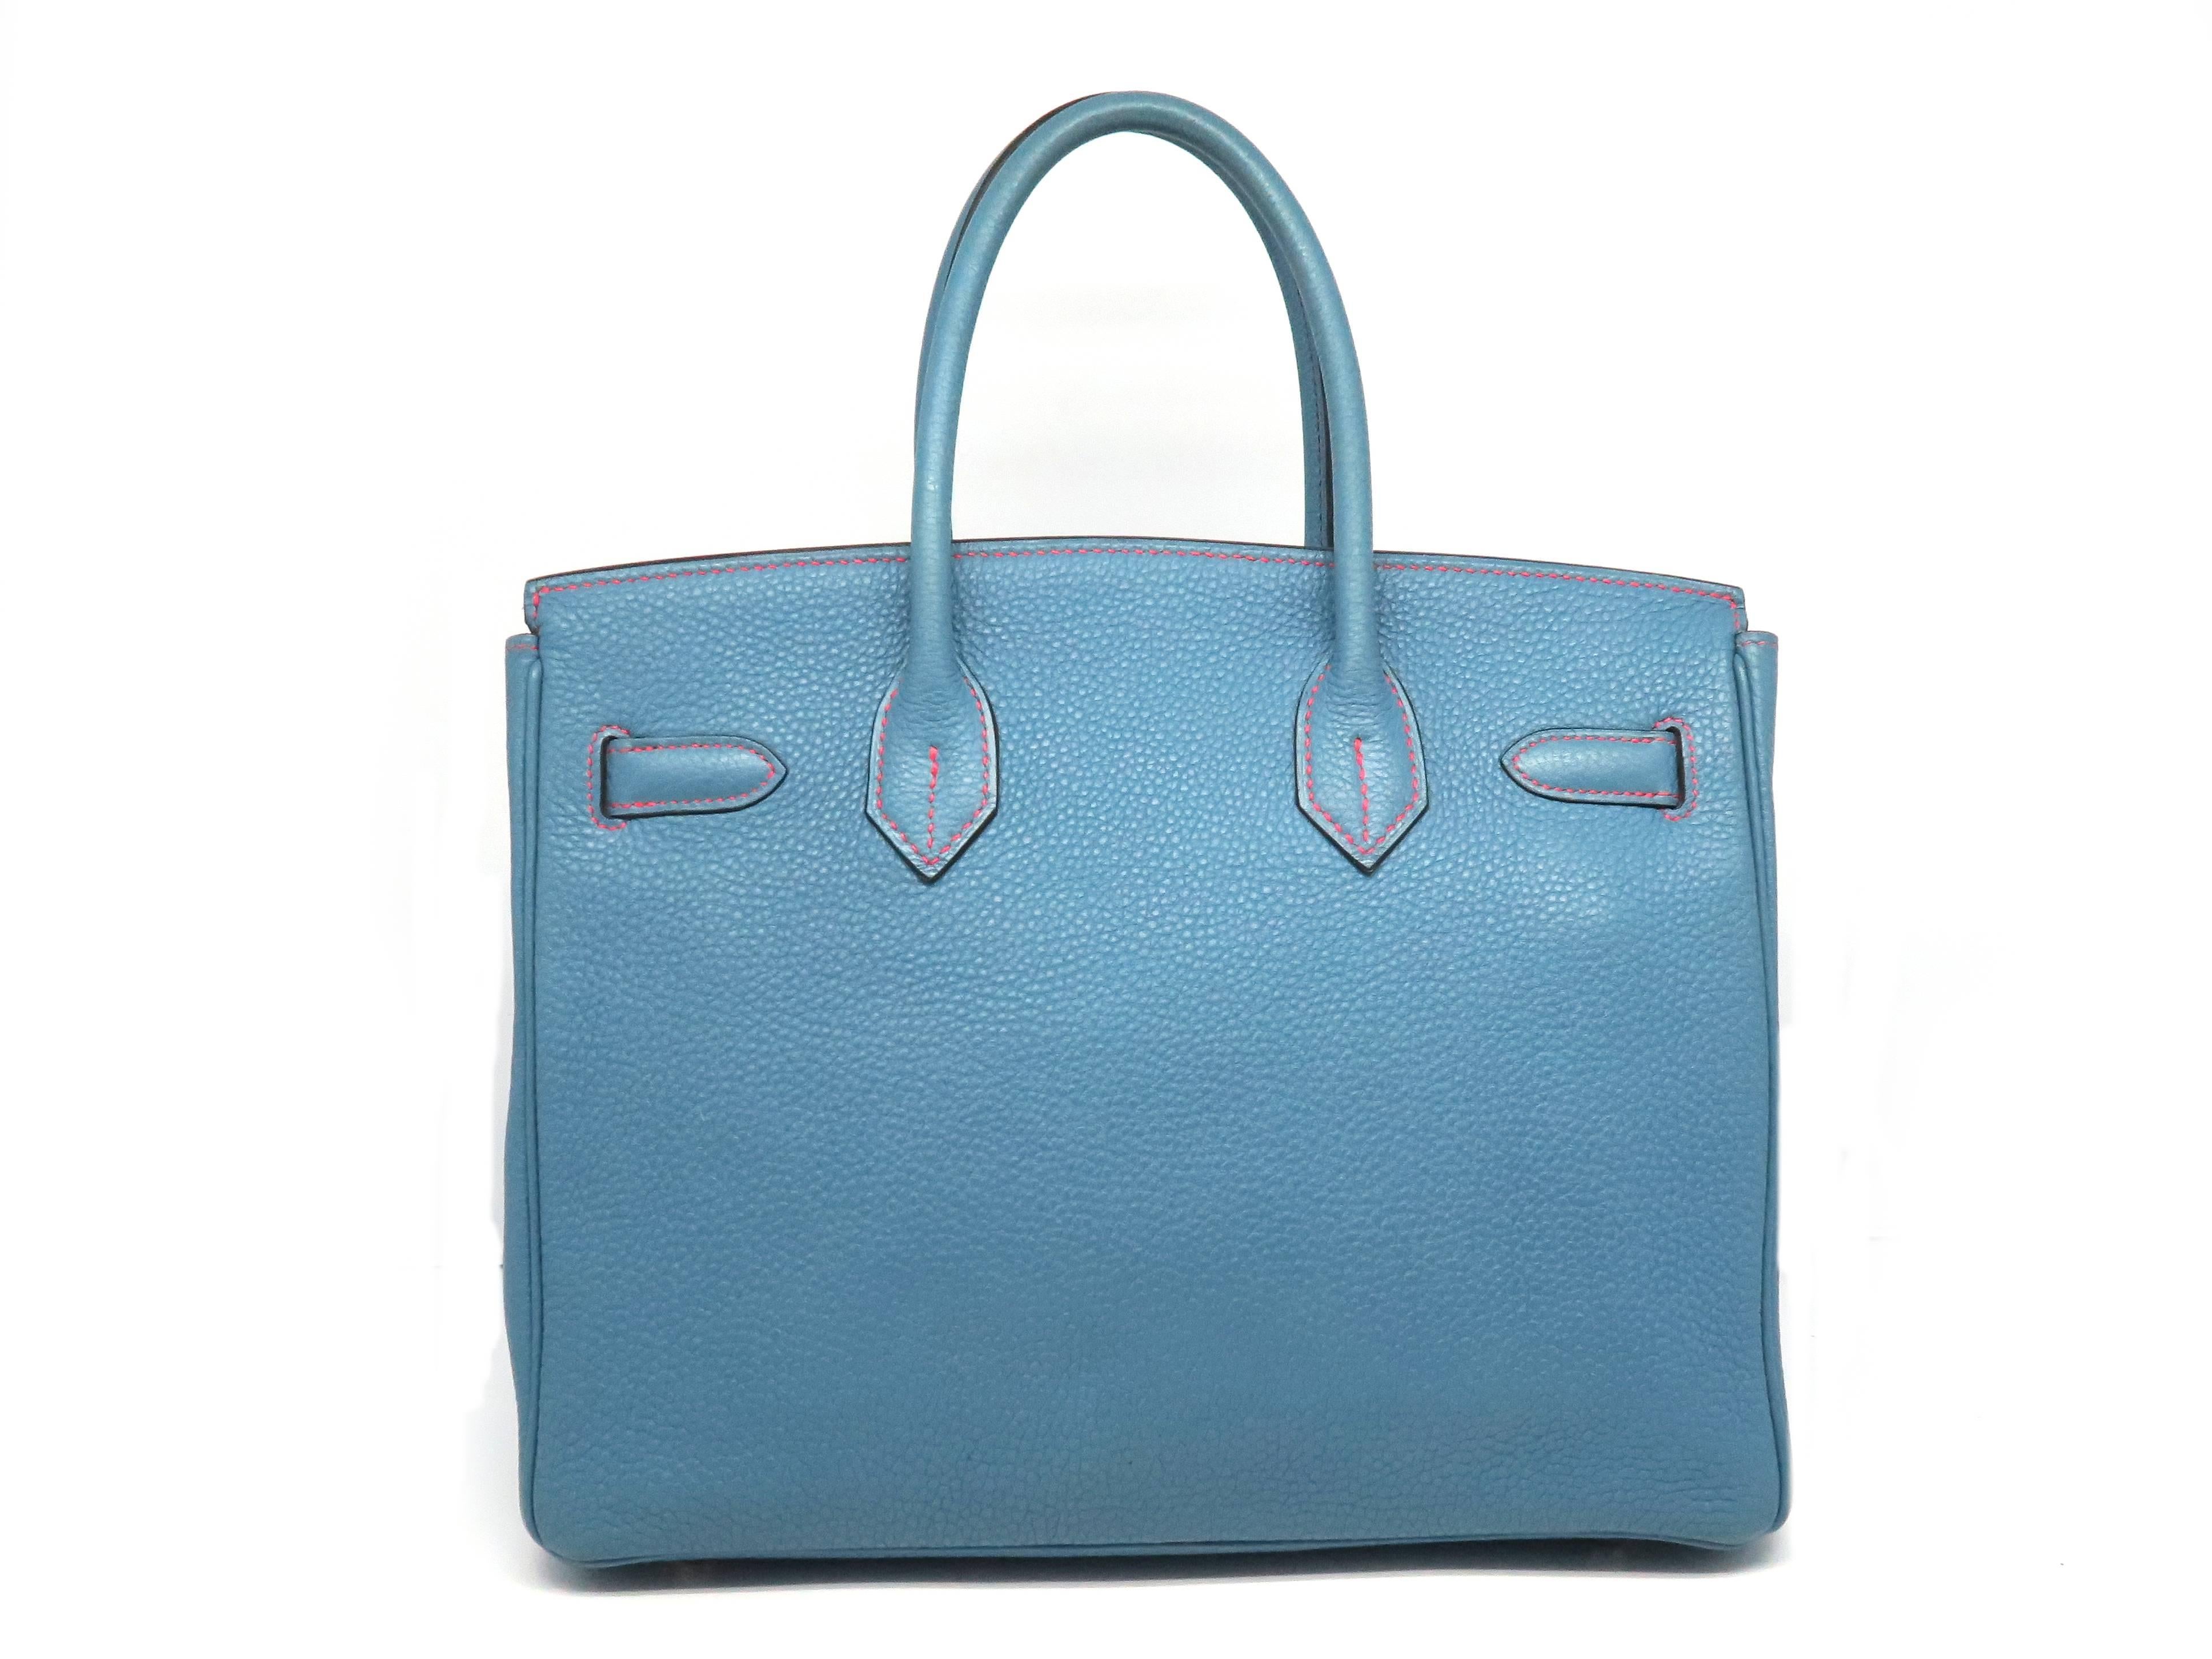 Hermes Birkin 30 Bleu Jean Blue Togo Leather SHW Top Handle Bag In Excellent Condition In Kowloon, HK